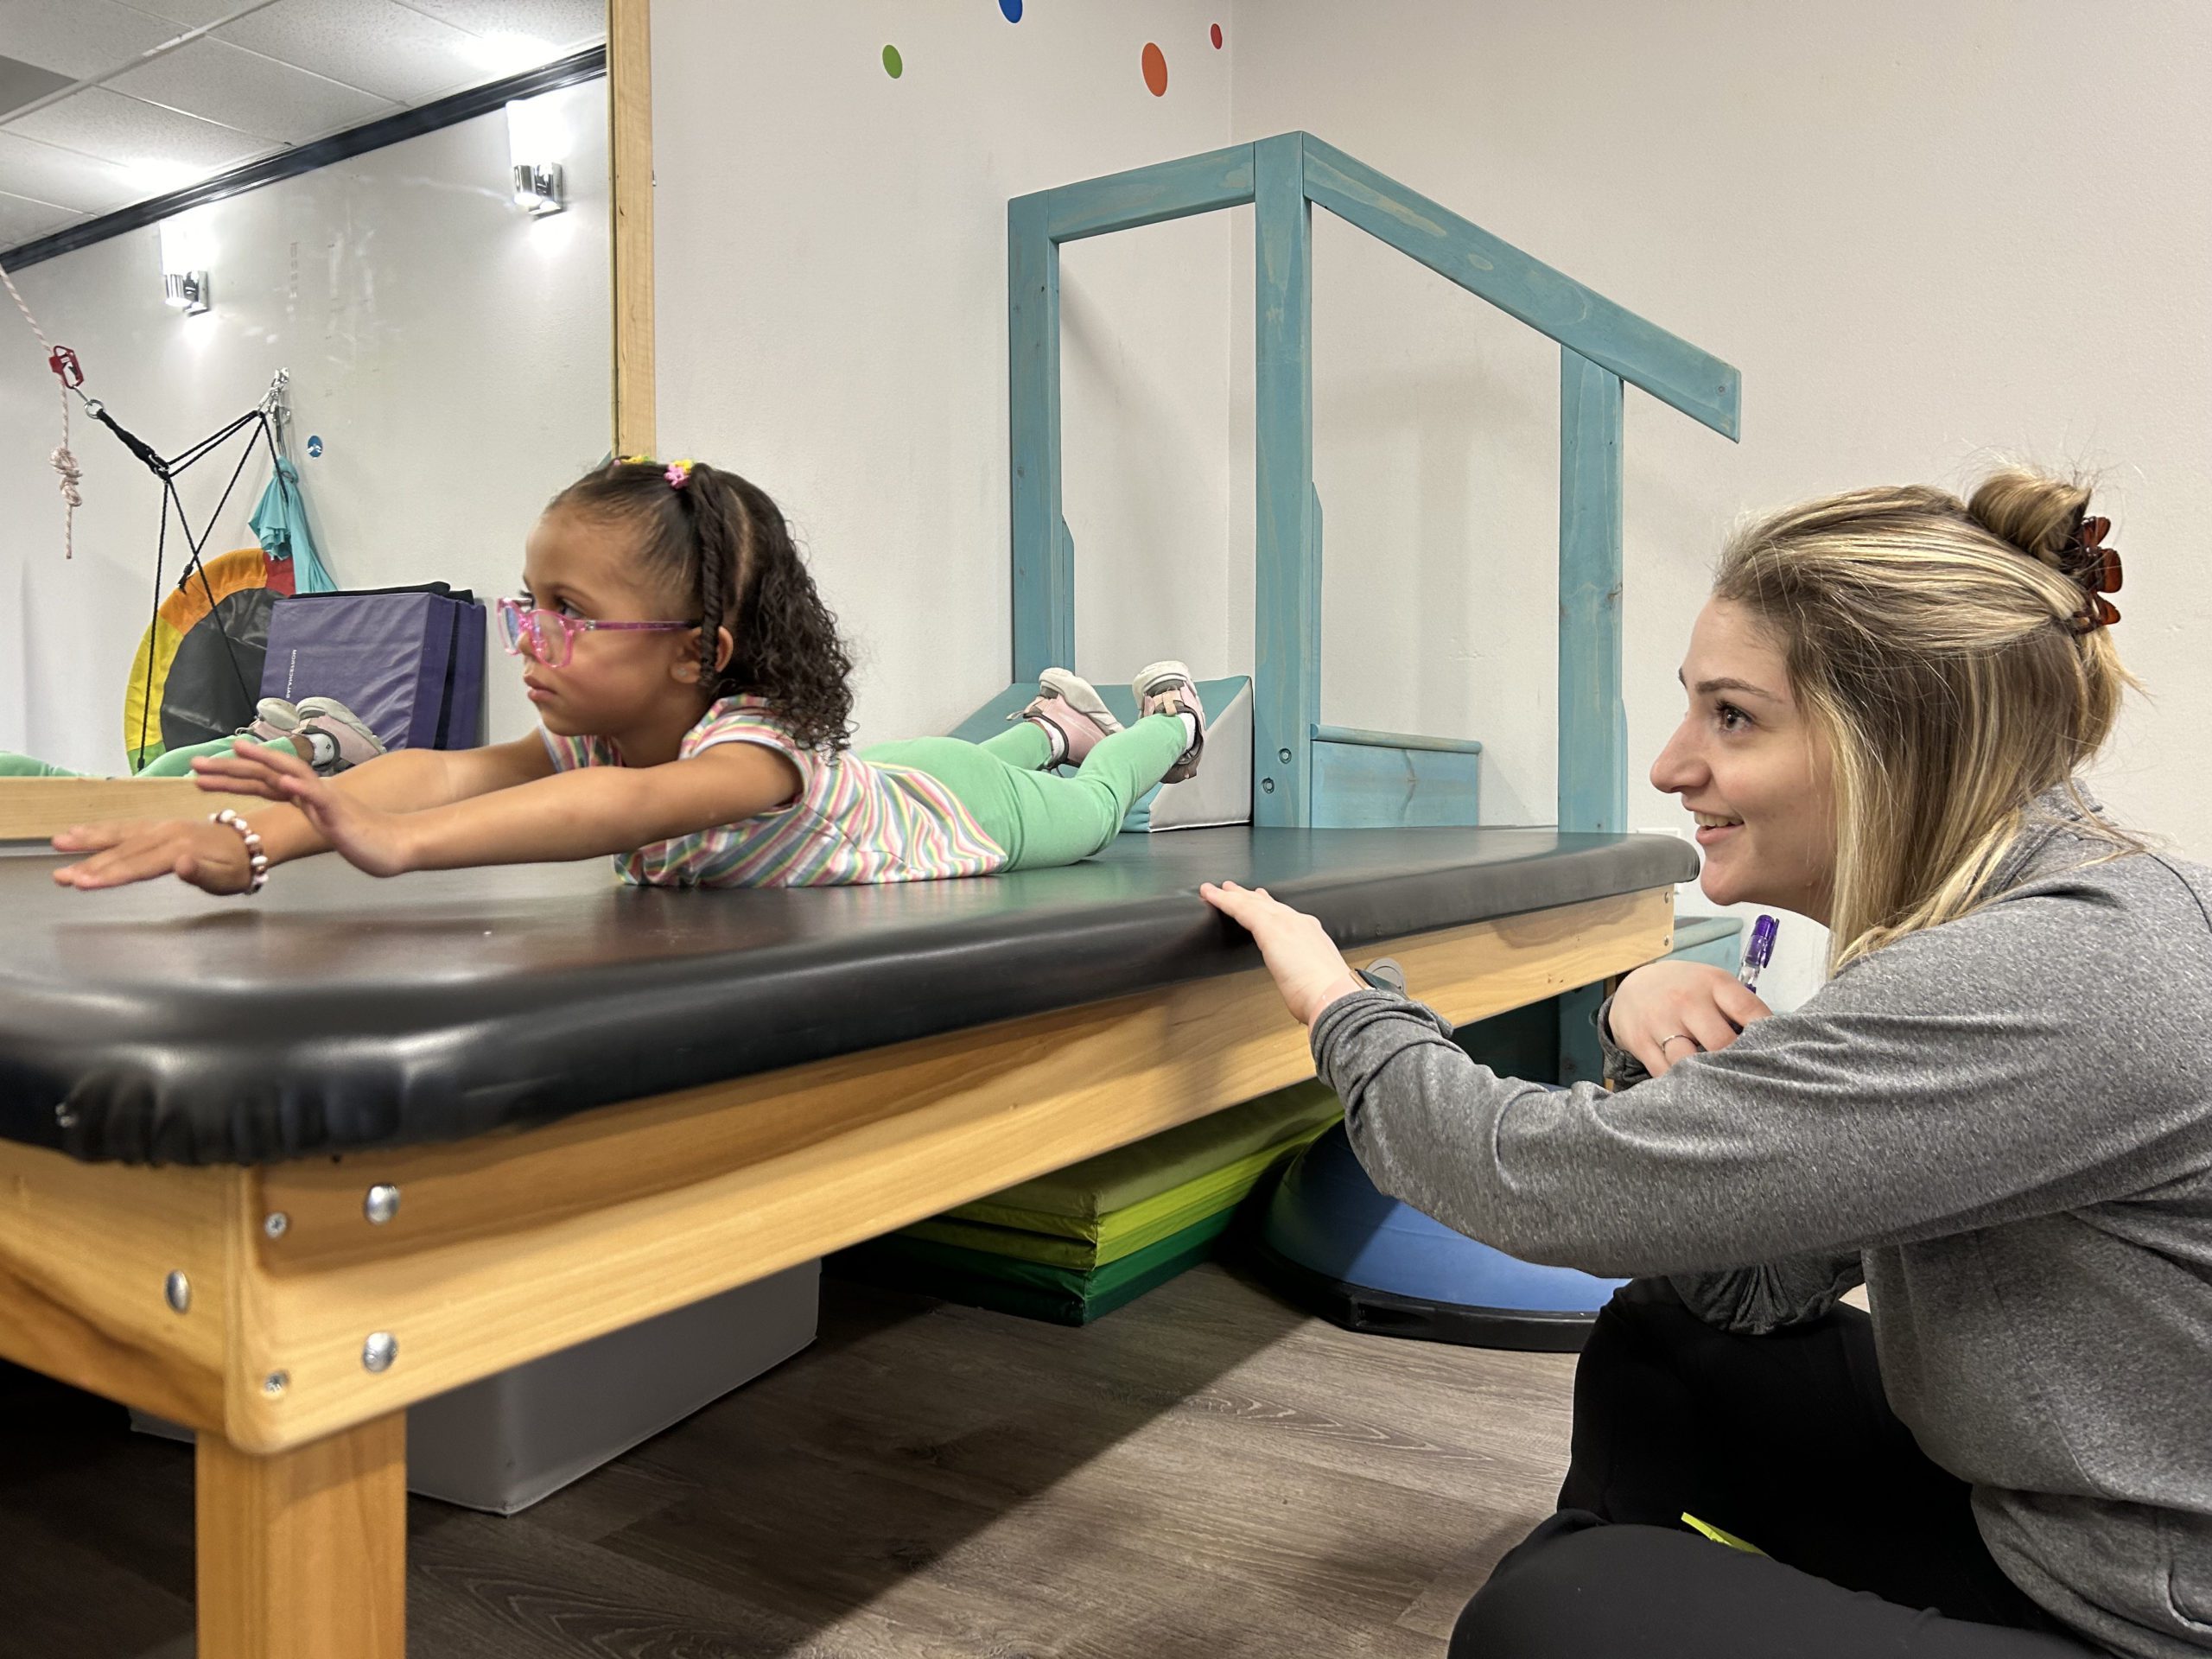 Child and Physical therapist on a plank